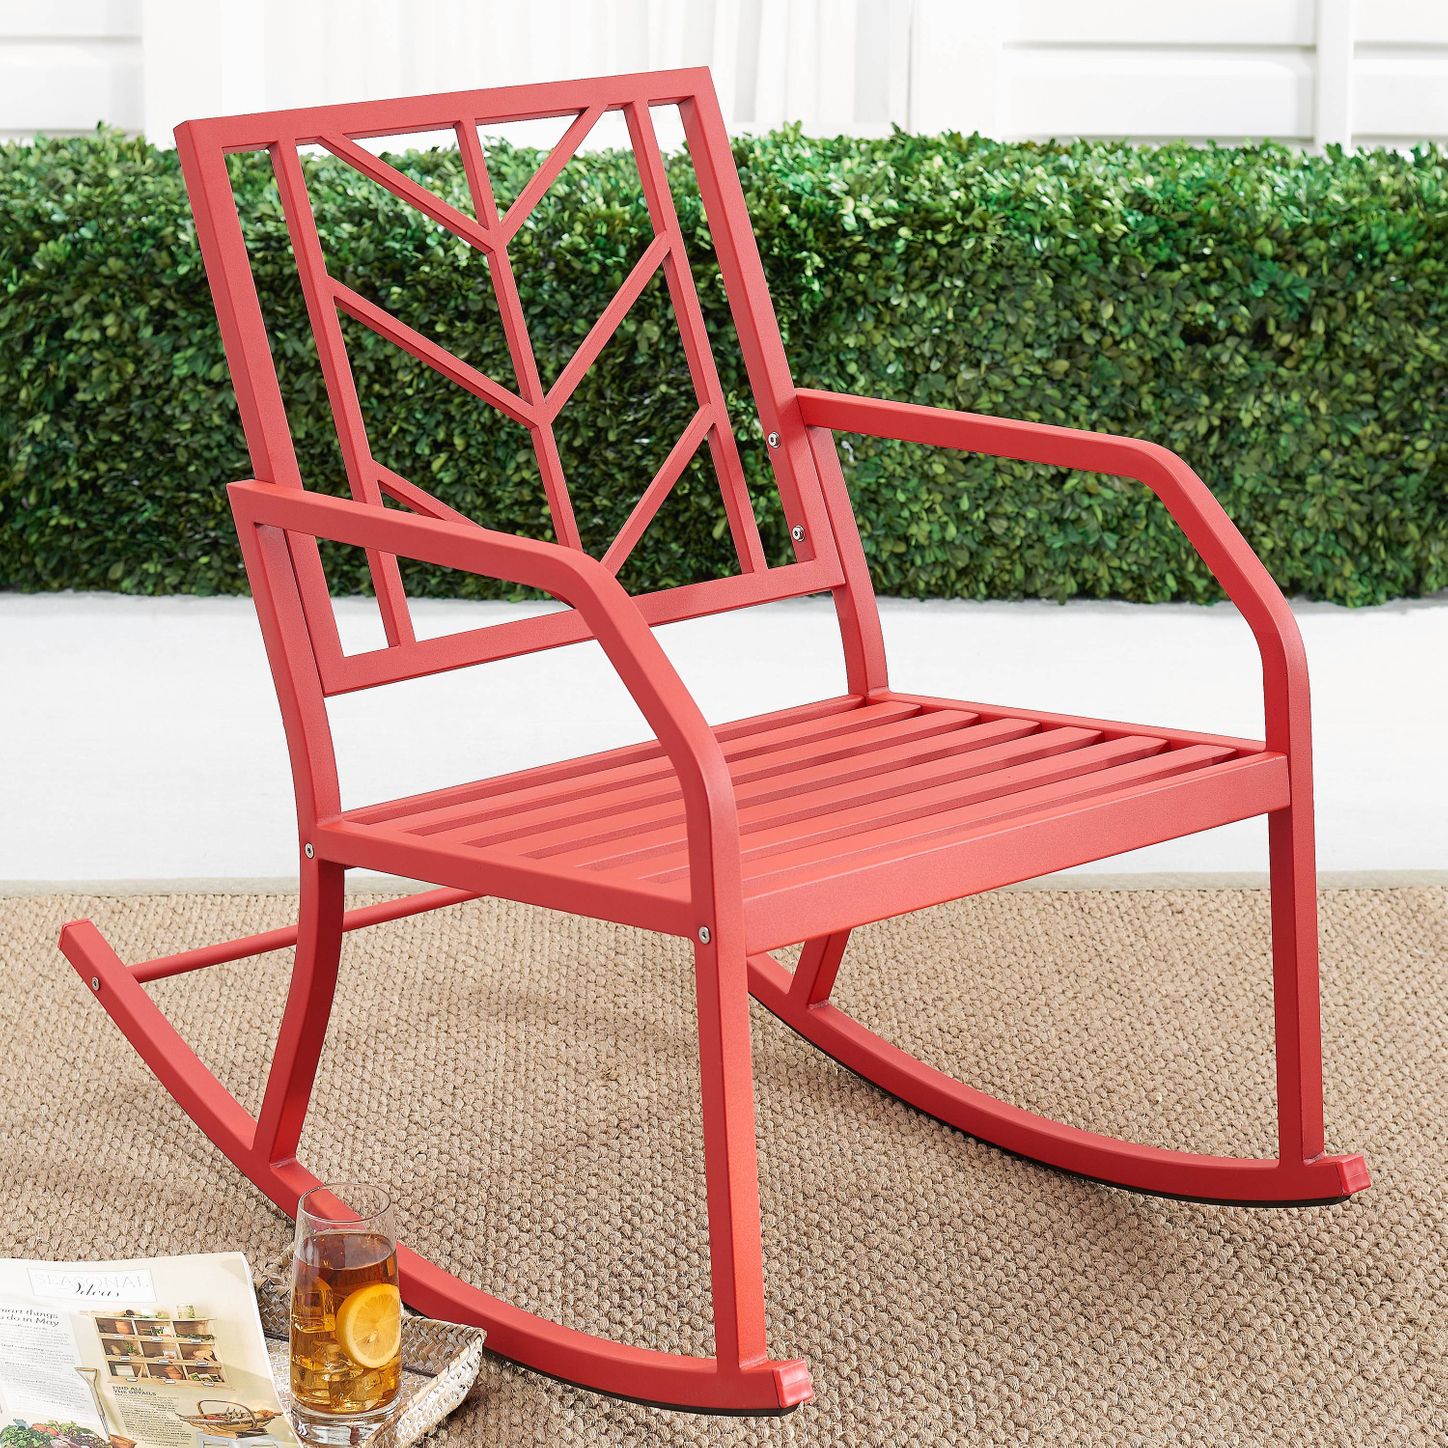 White Mainstays Evry Bell Outdoor Metal Rocking Chair 